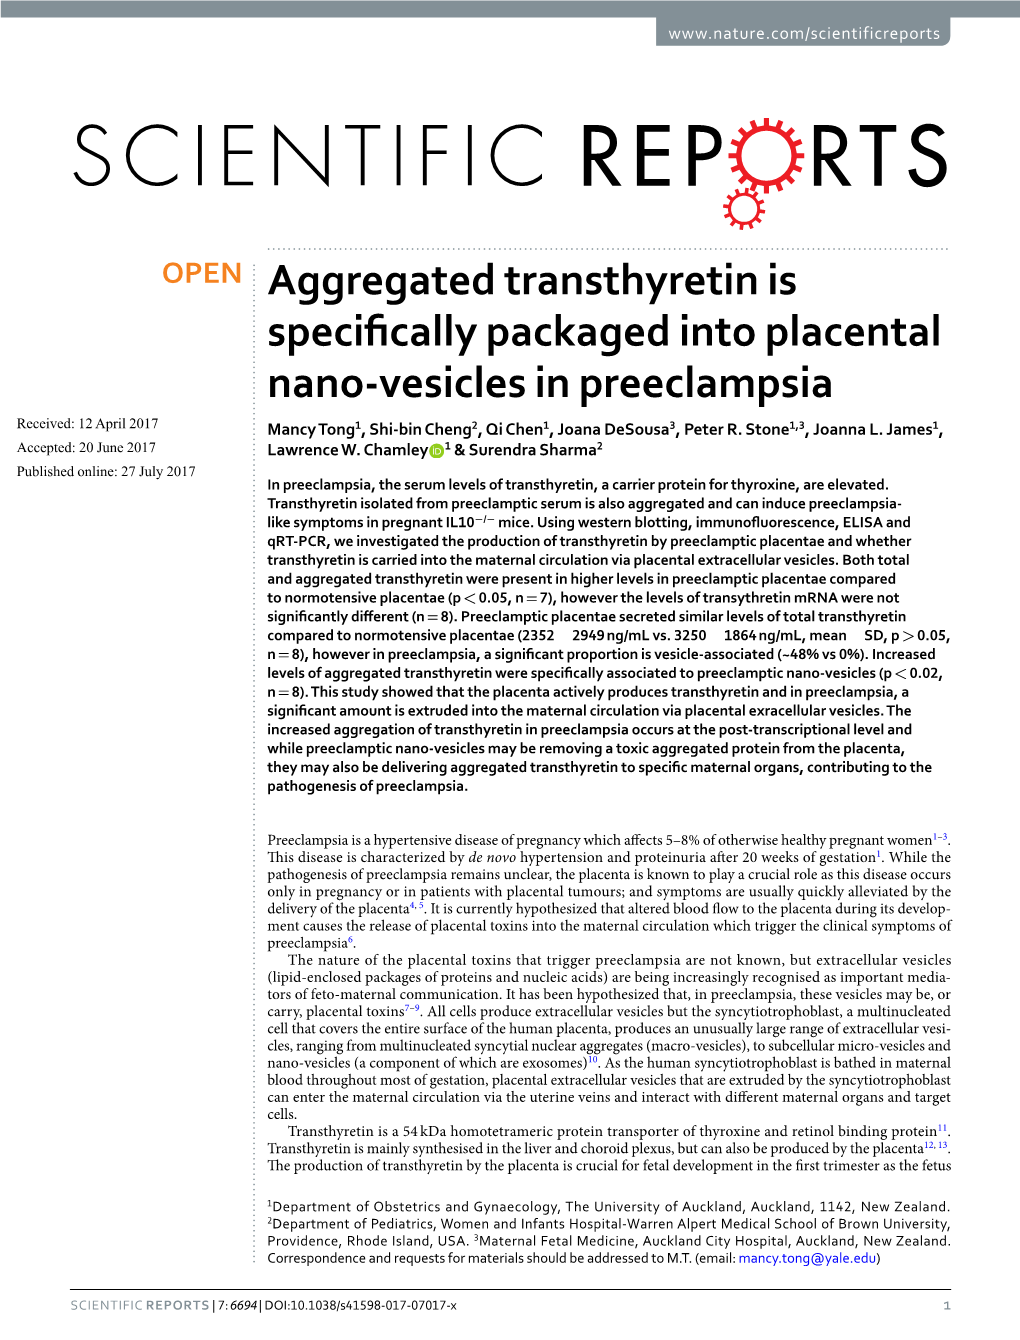 Aggregated Transthyretin Is Specifically Packaged Into Placental Nano